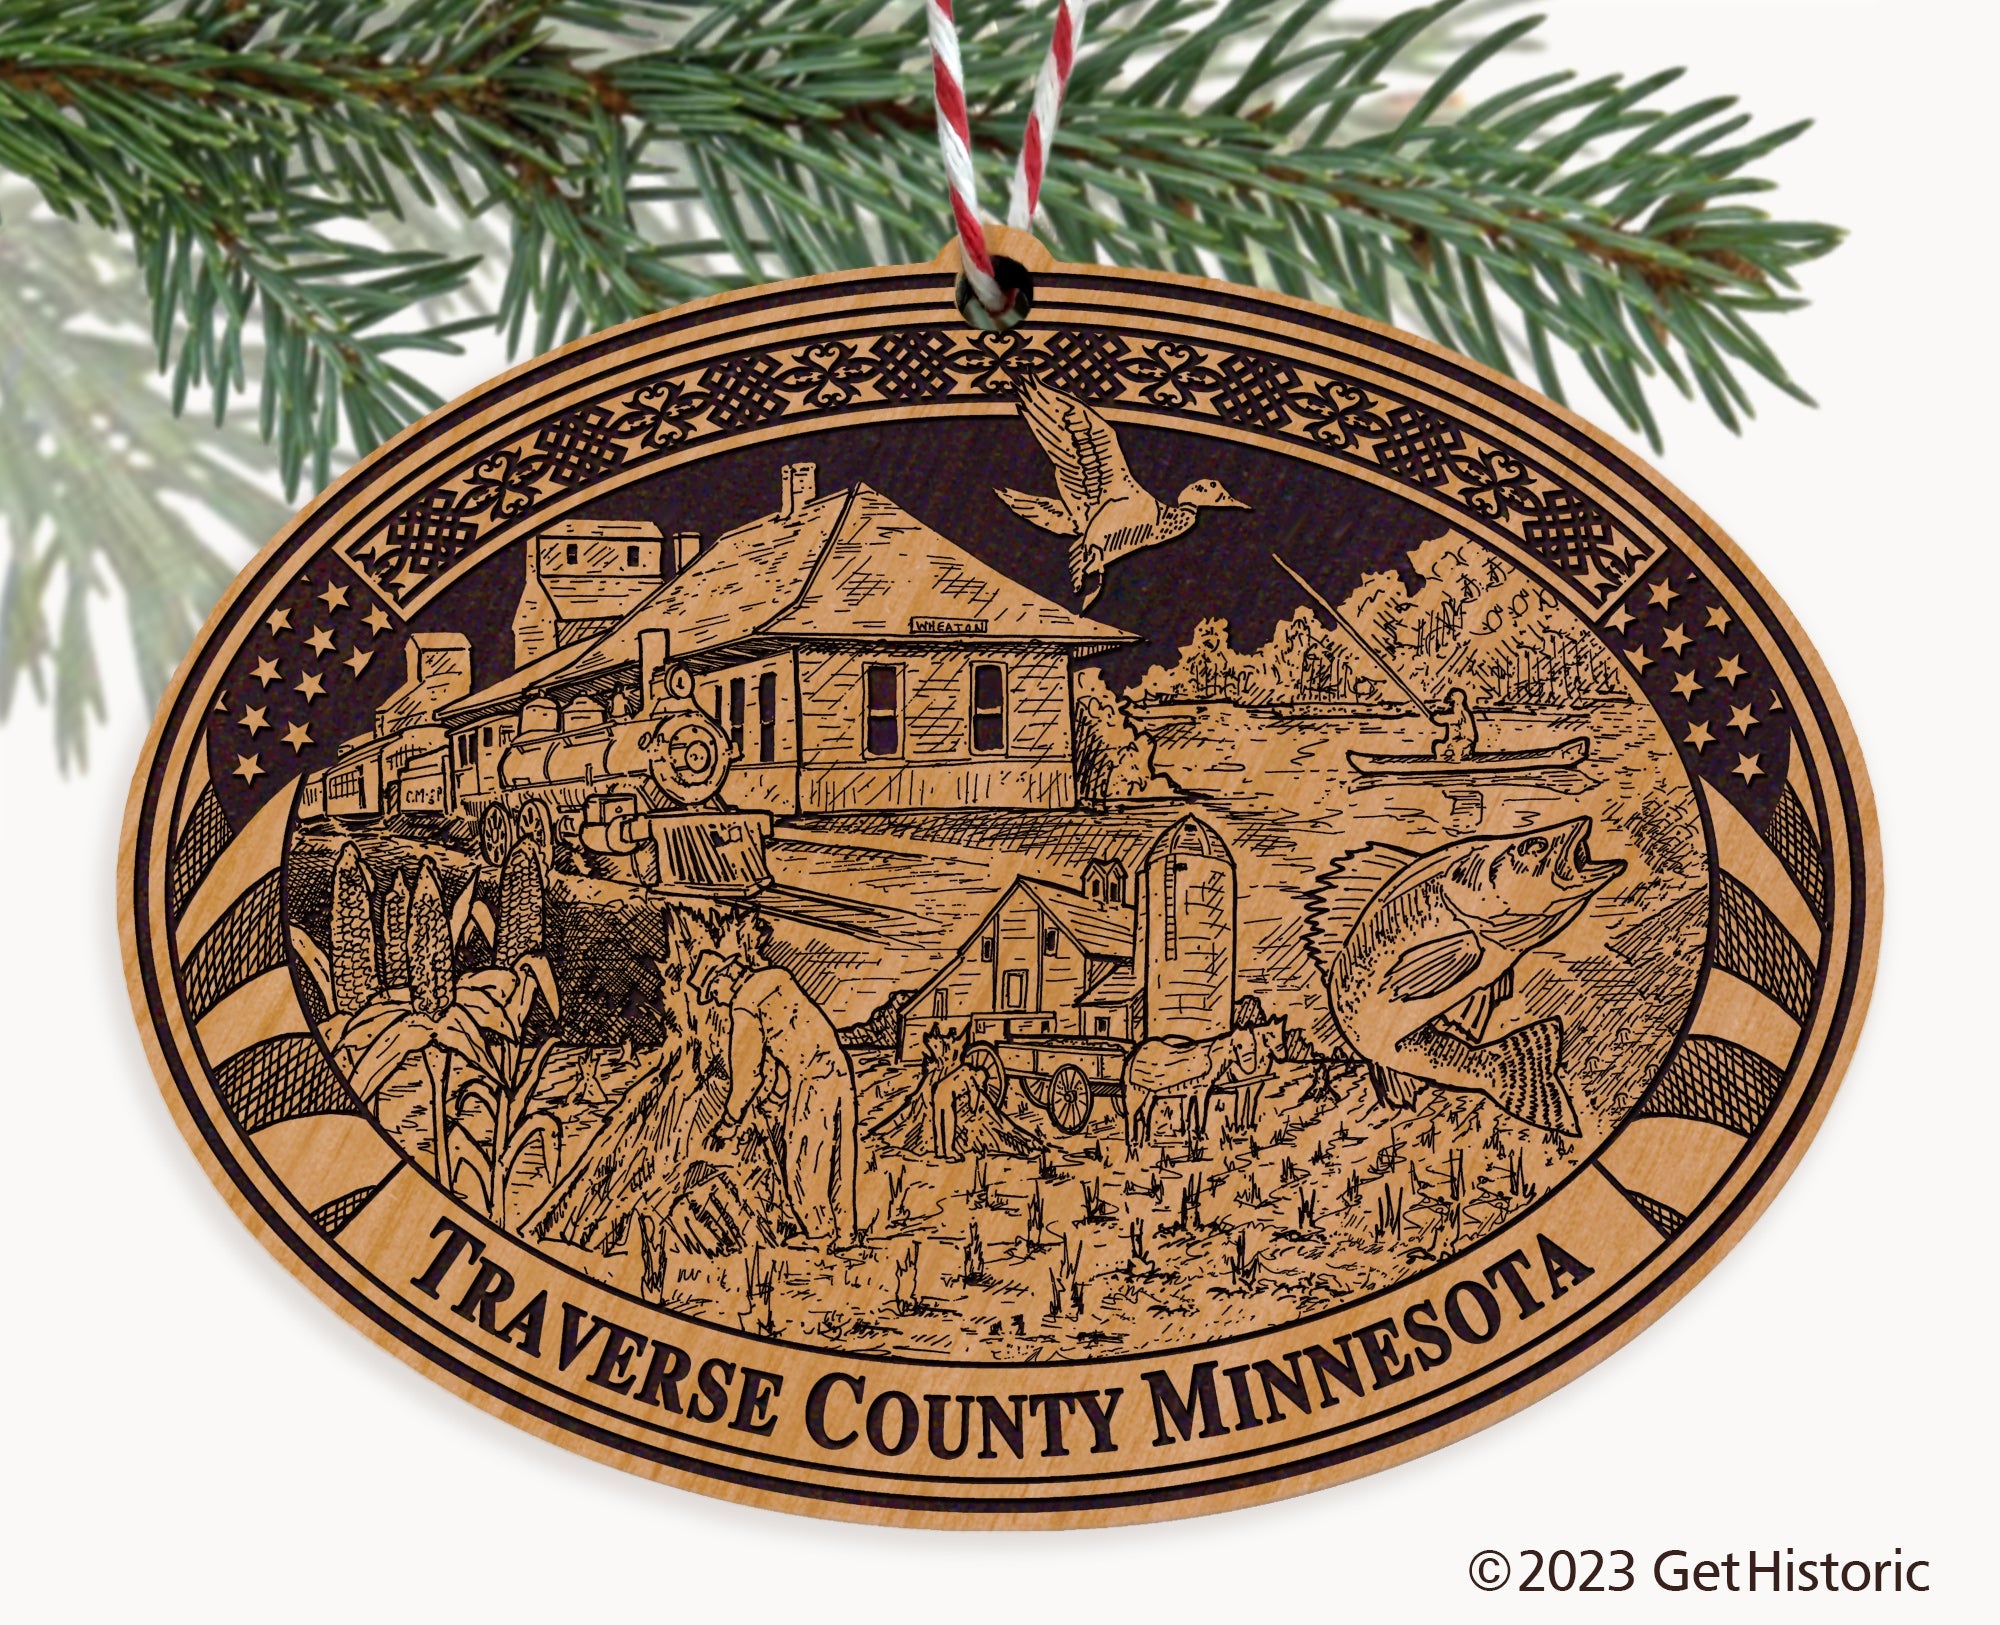 Traverse County Minnesota Engraved Natural Ornament